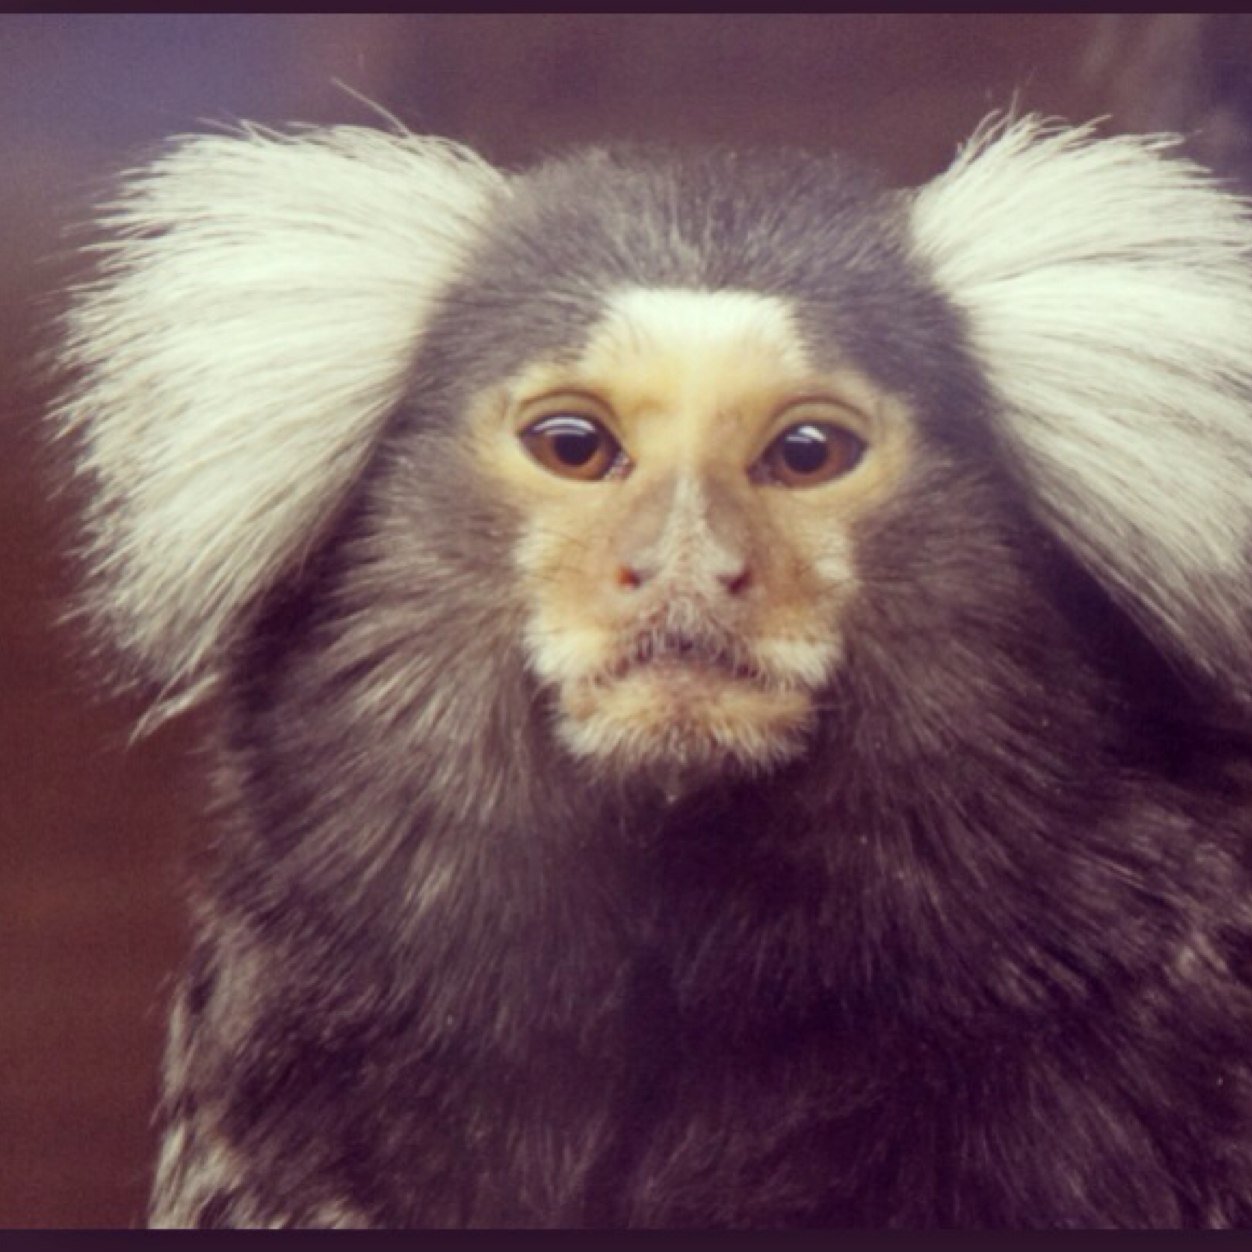 Help find Binky The Marmoset...
Also read @Dannywallace 's 
'Who Is Tom Ditto?'